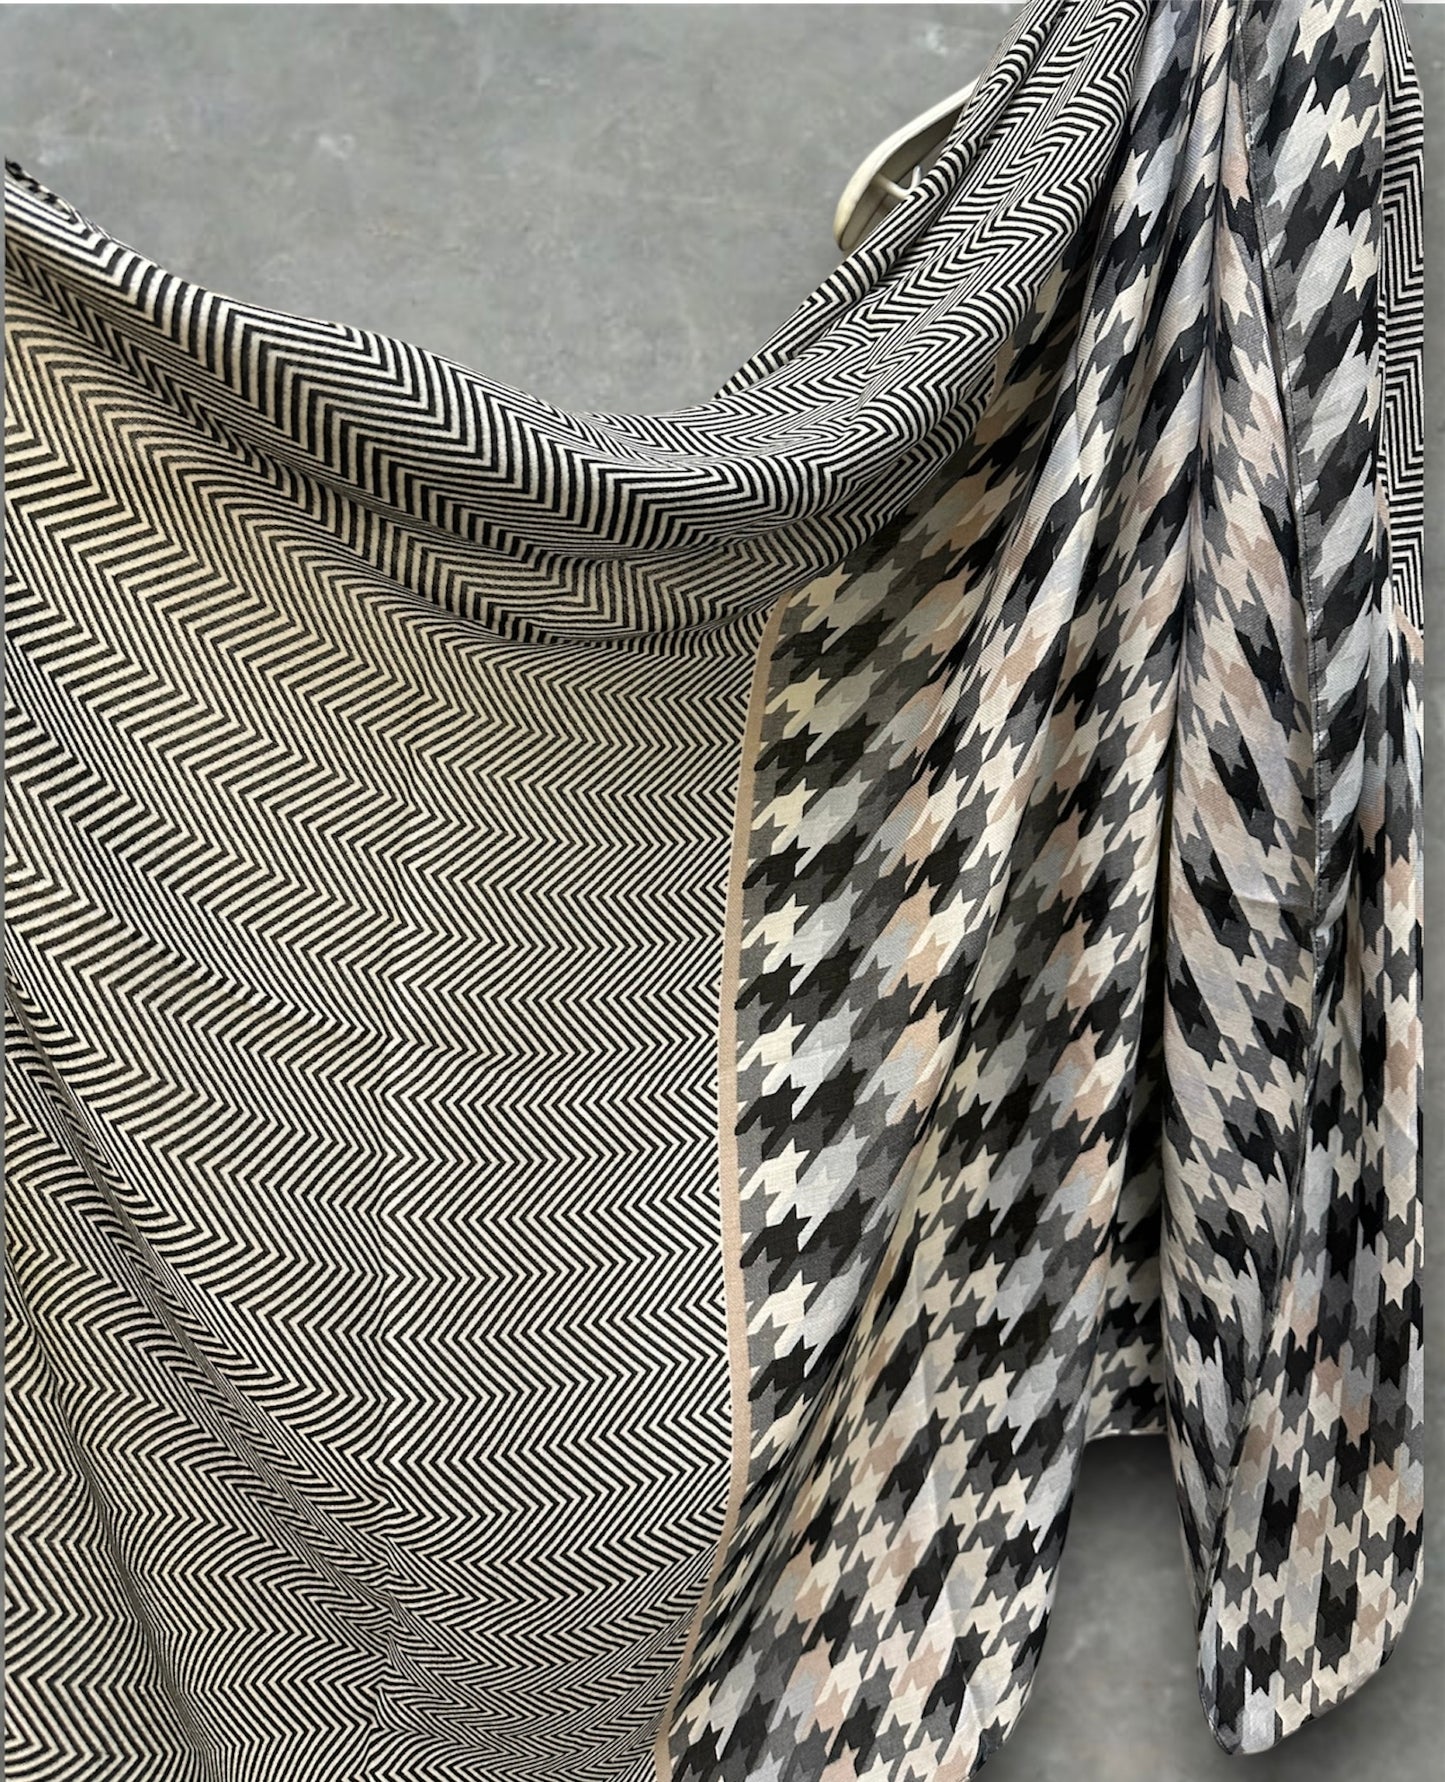 Grey Cotton Scarf with Eco-Friendly Houndstooth Pattern – A Thoughtful Gift for Mom on Any Special Day